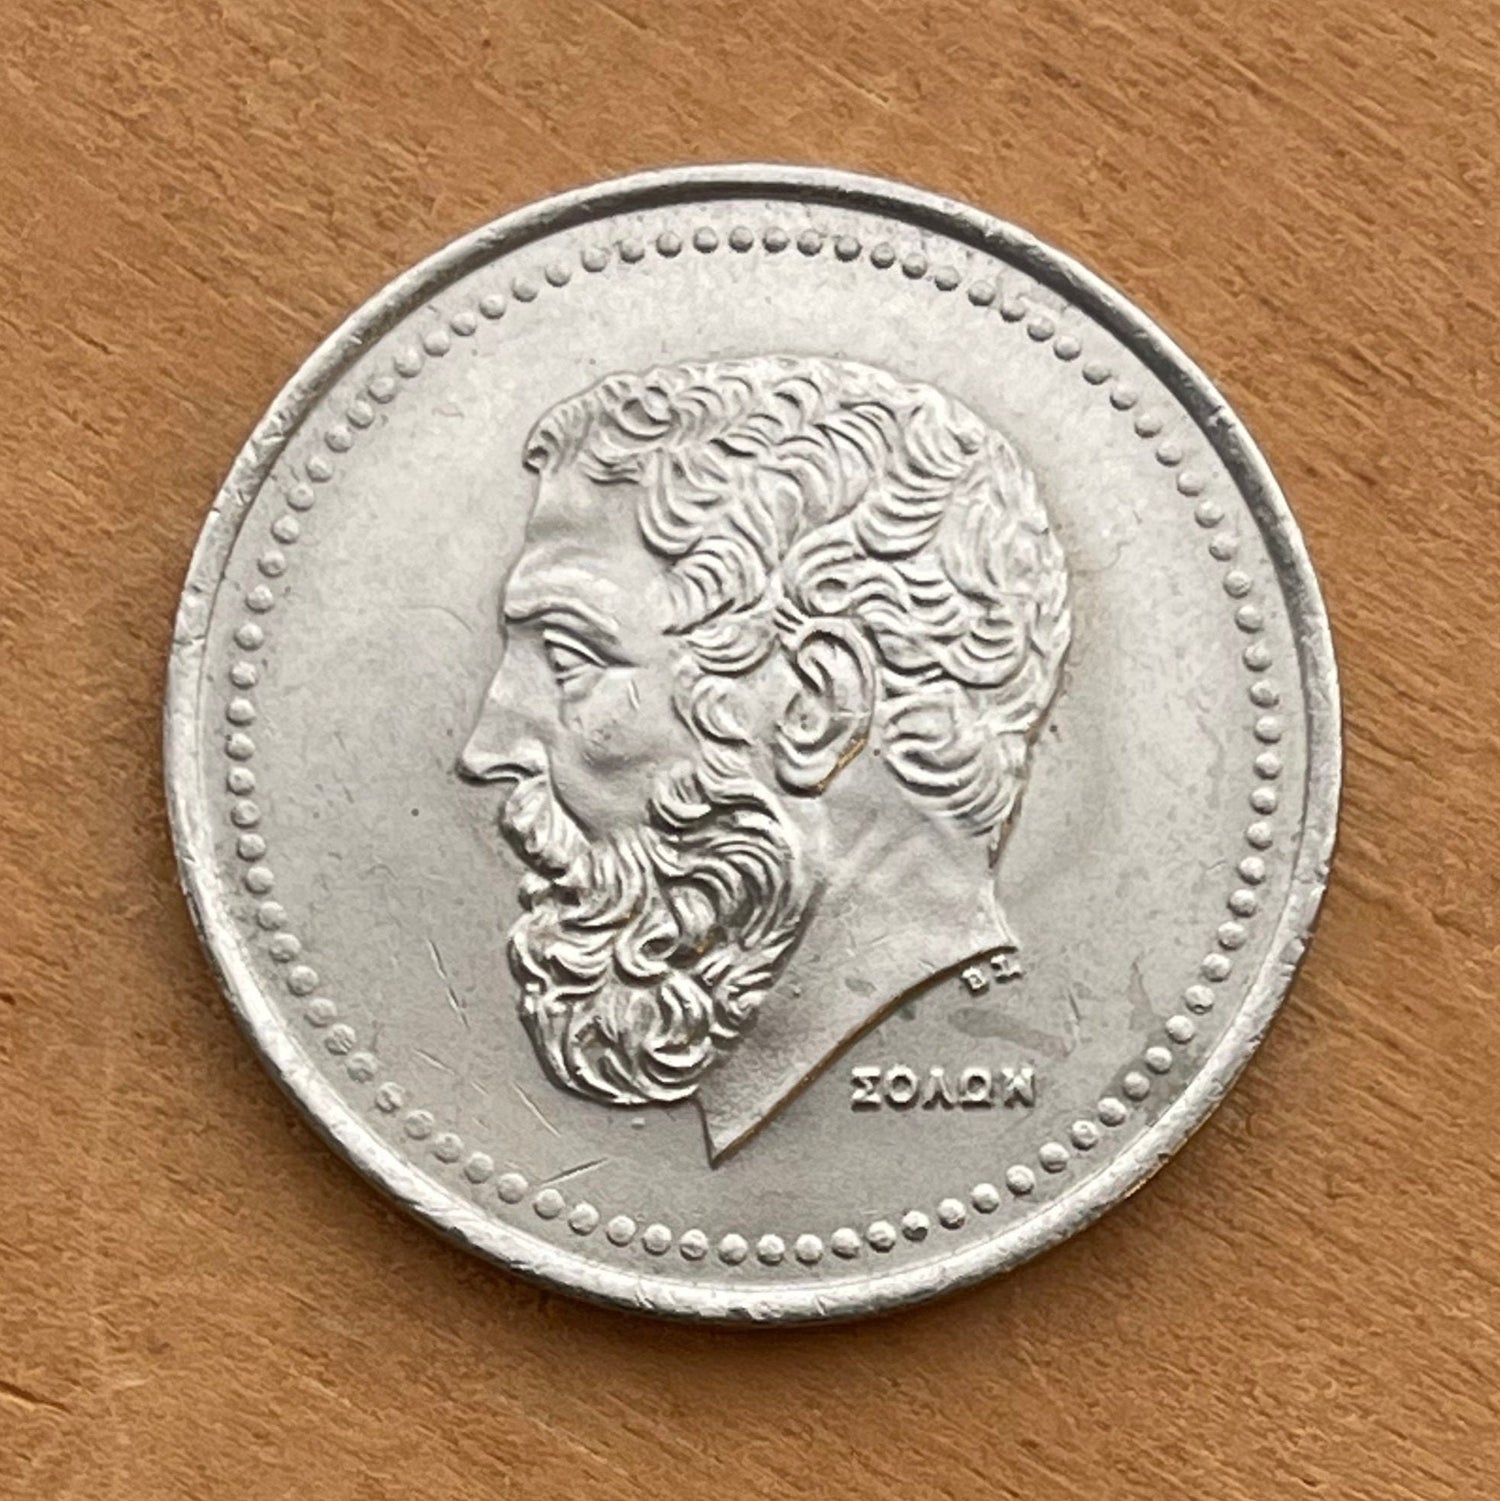 Ancient Lawmaker Solon of Athens 50 Drachmes Greece Authentic Coin Money for Jewelry (Greek Democracy) (Wise Man) (VERY FINE)